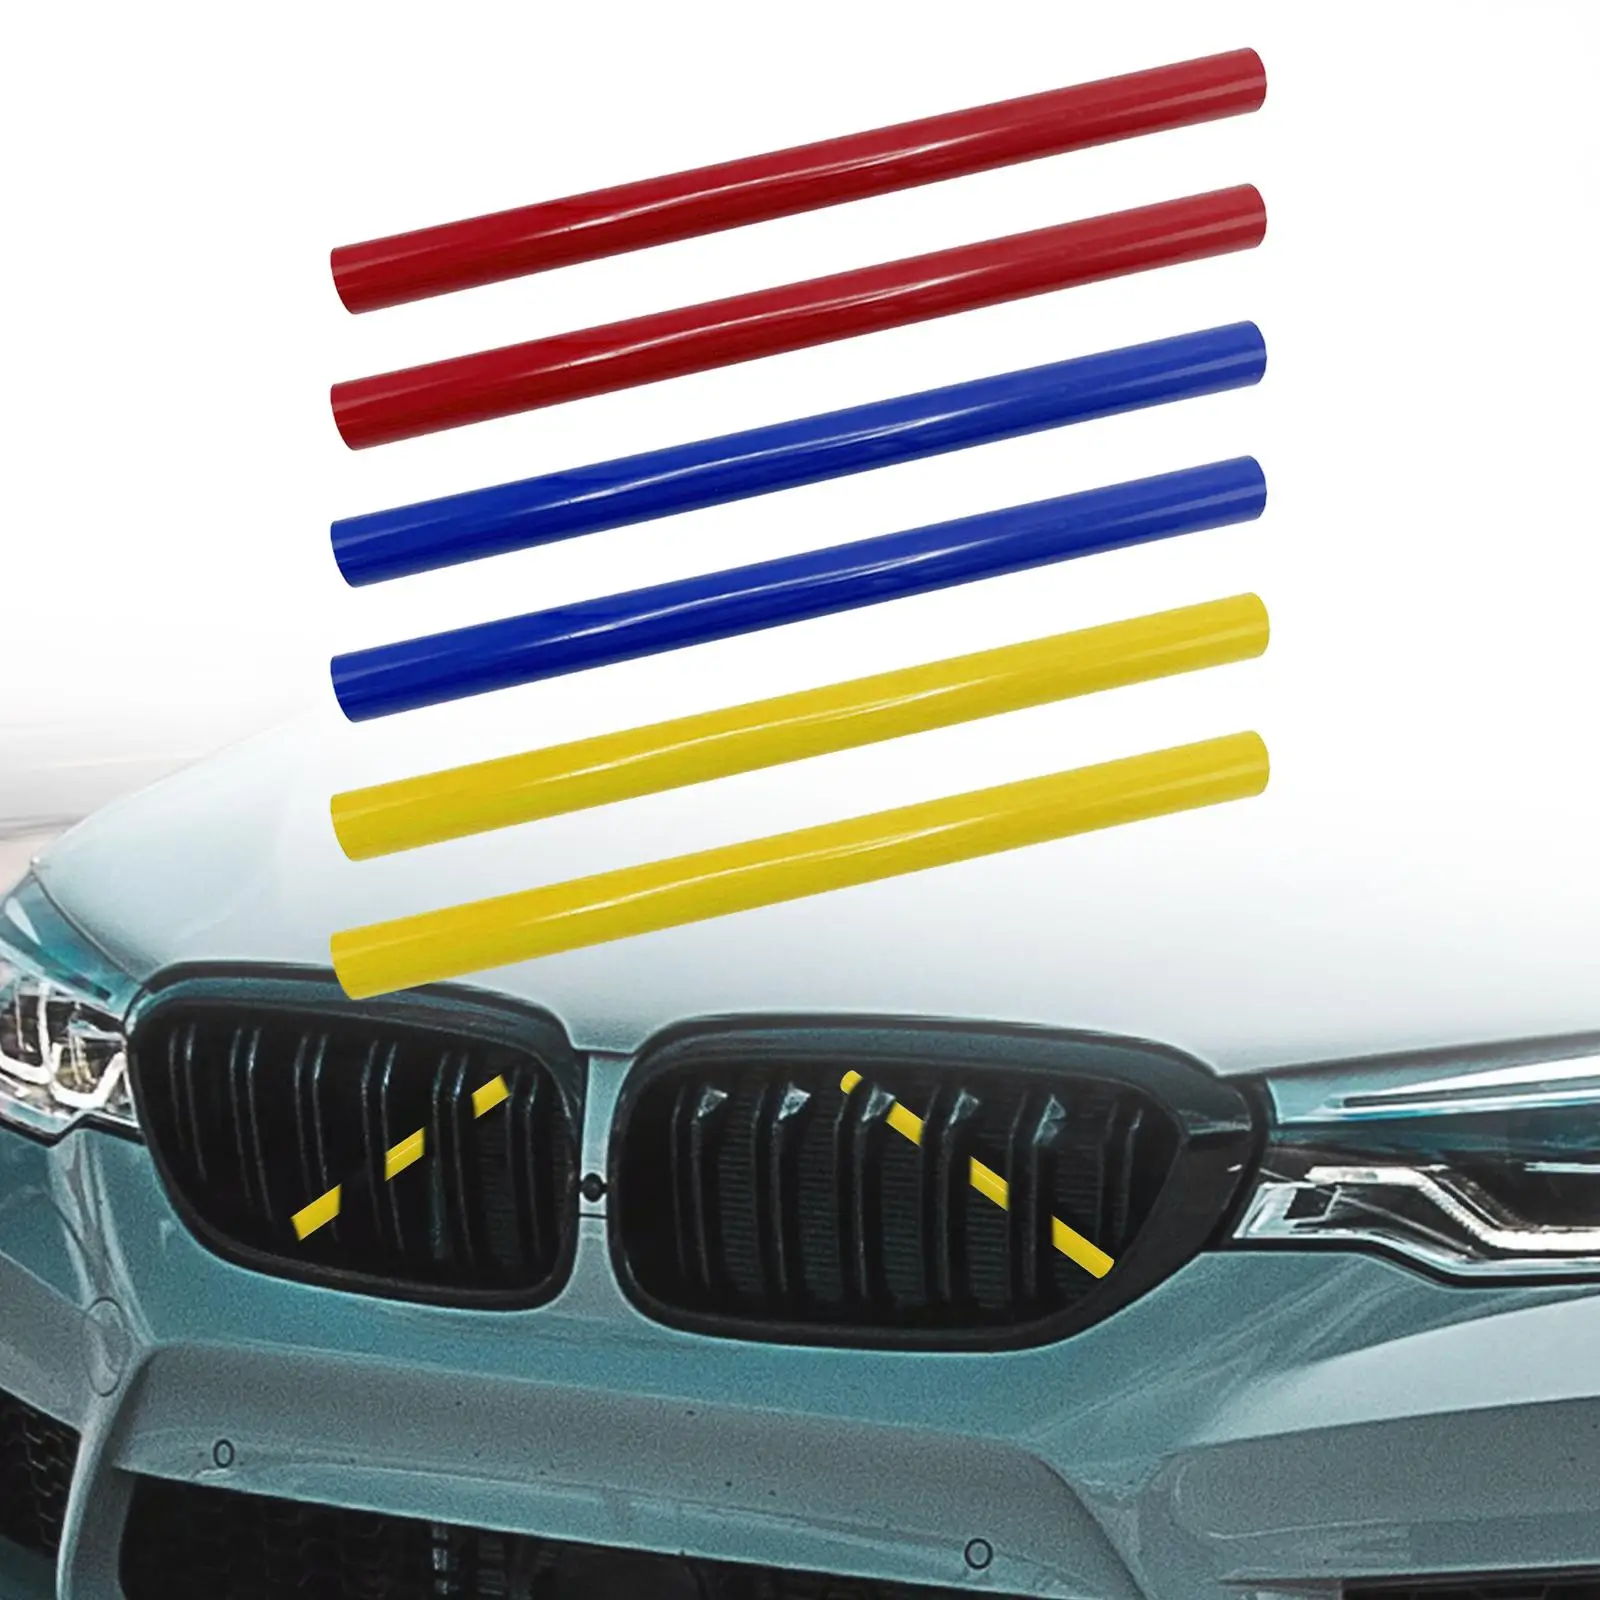 2x Grille Insert Trims Replaces for 120i 125i 130i Hatchback 2012-2016